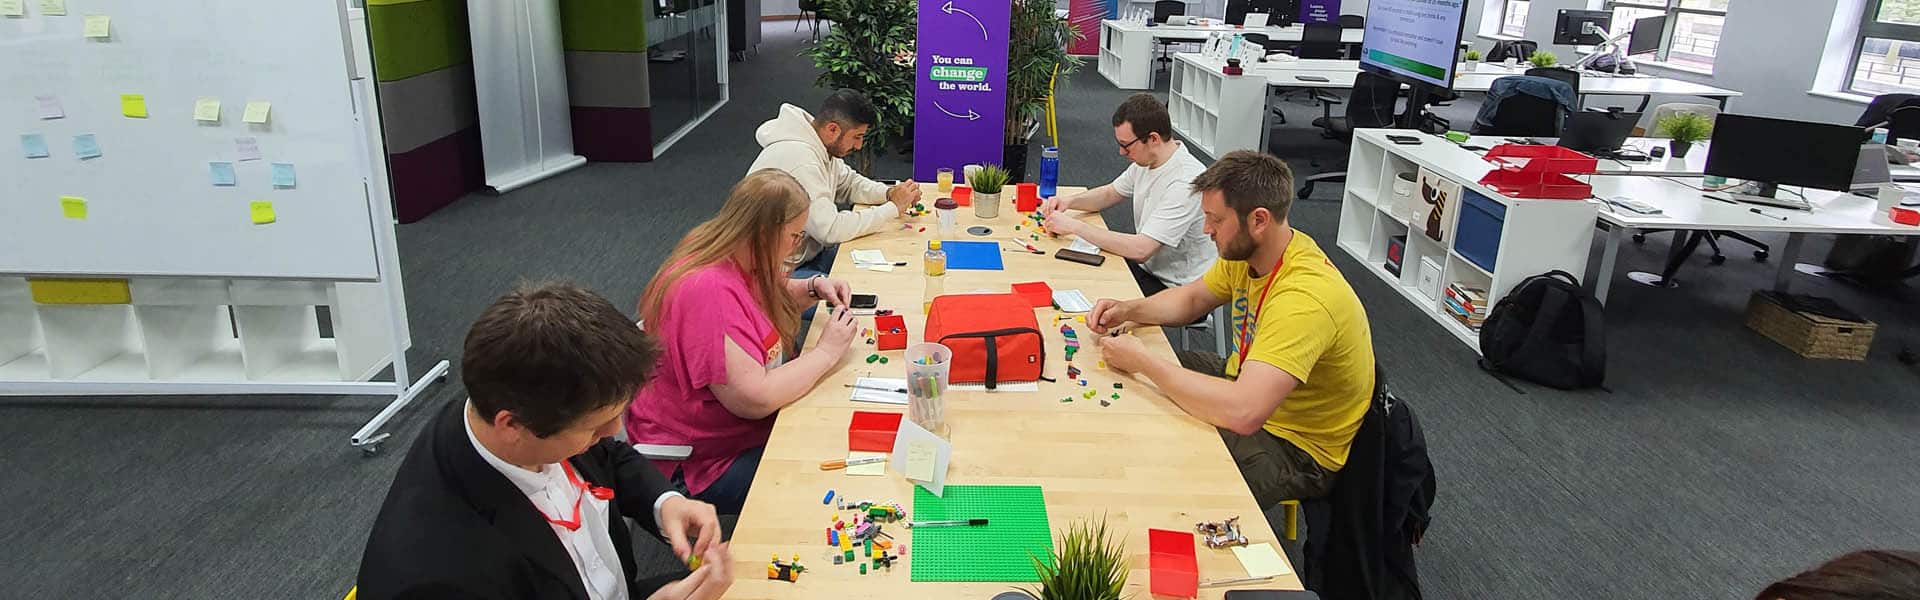 People using LEGO as part of a facilitation workshop